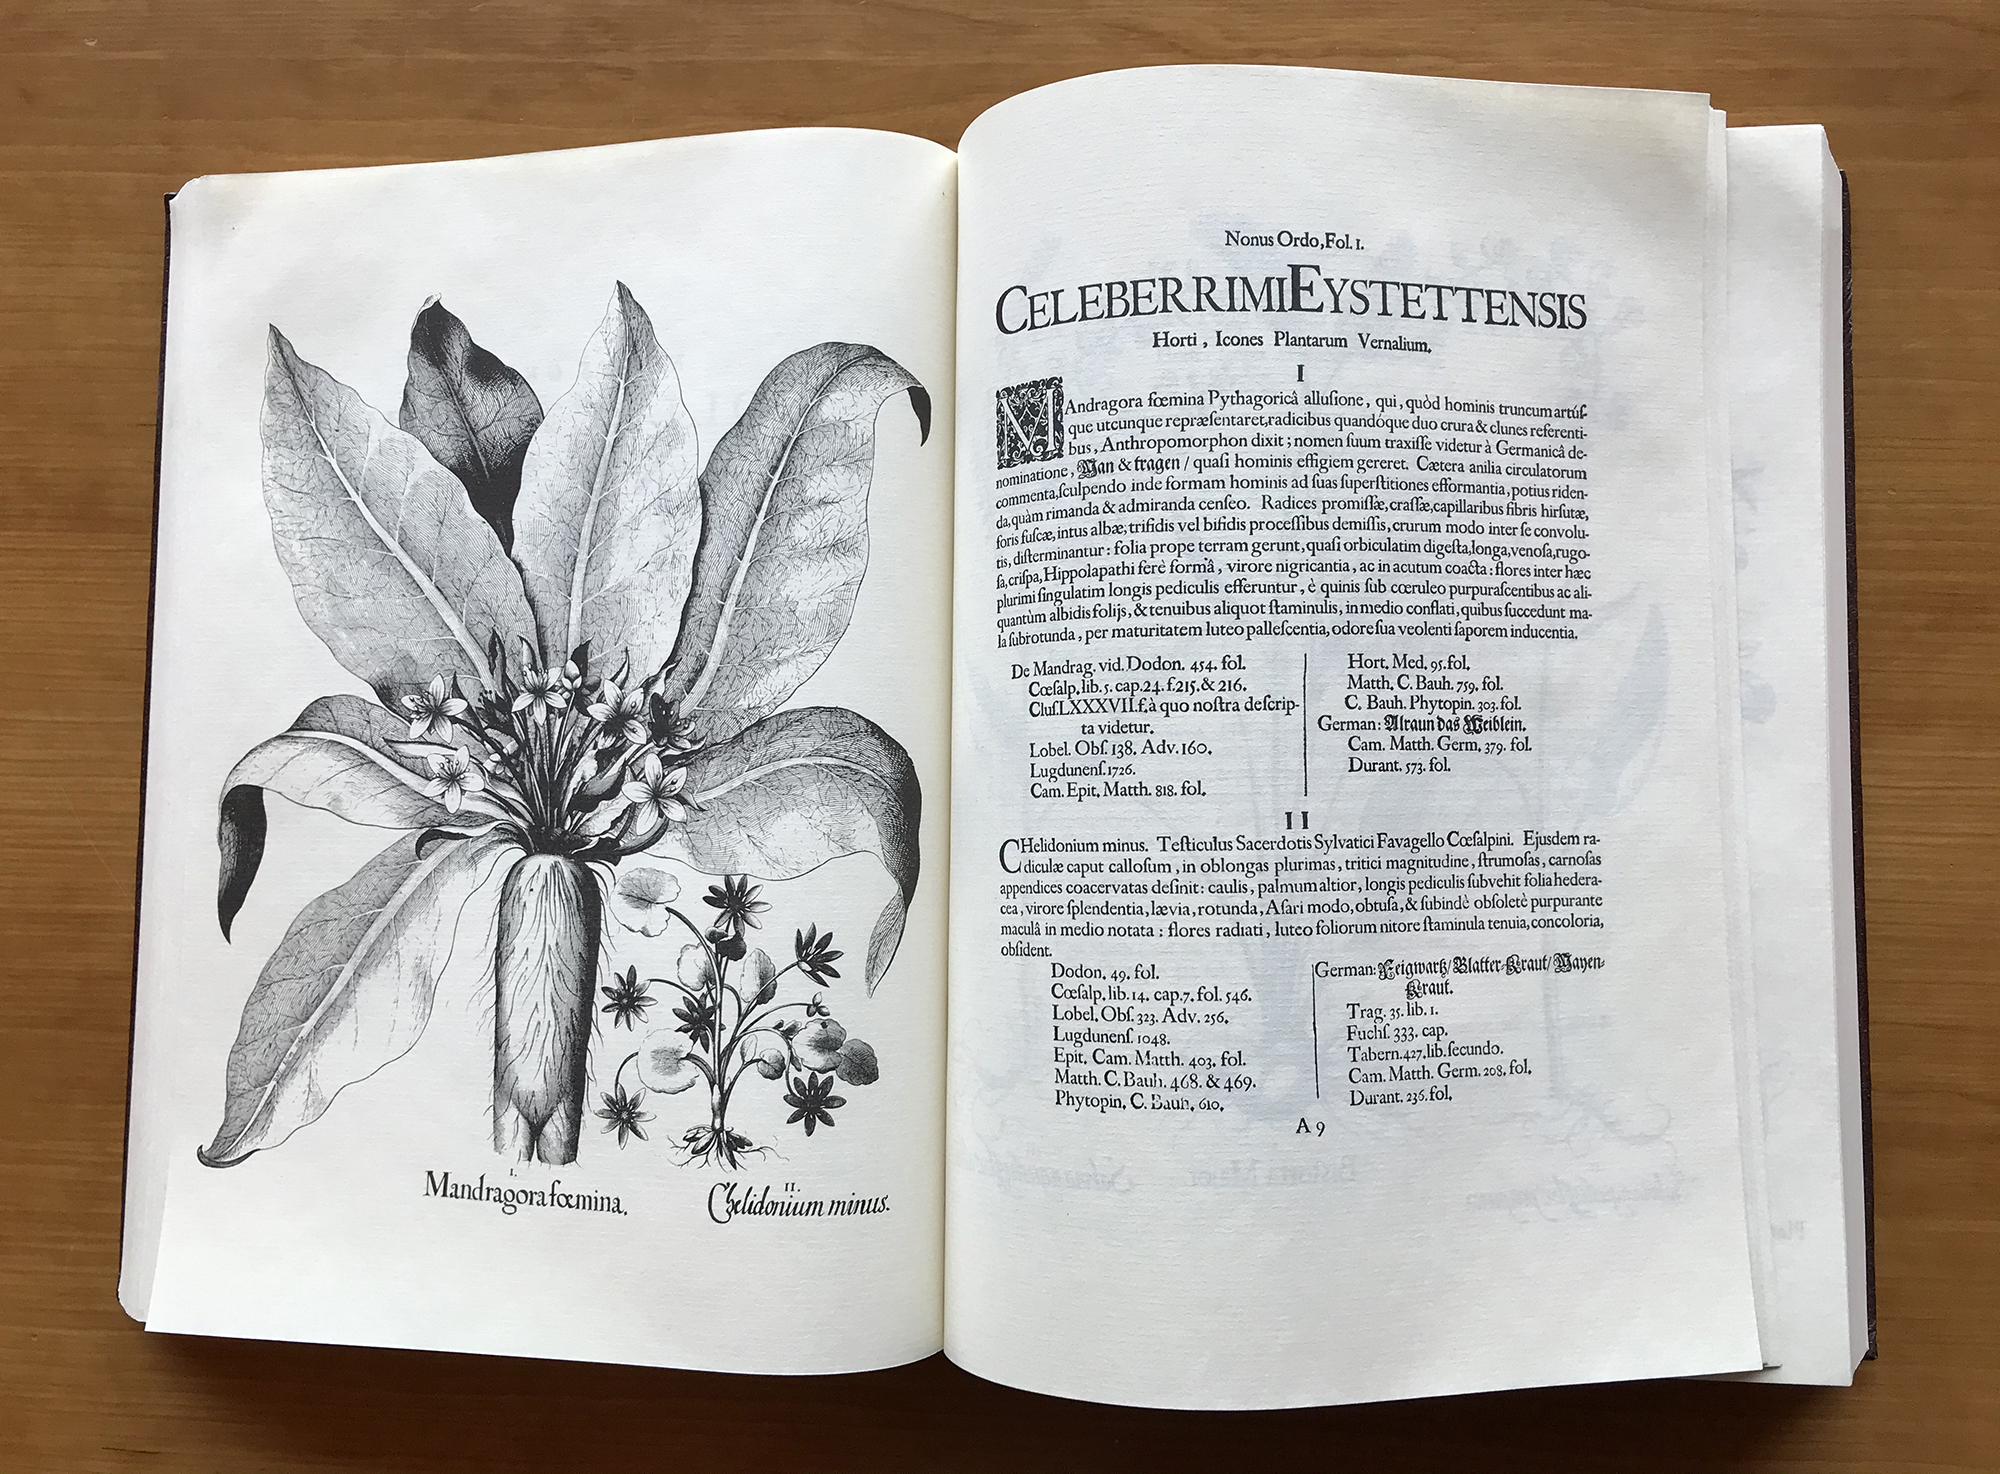 Example of a herbal book